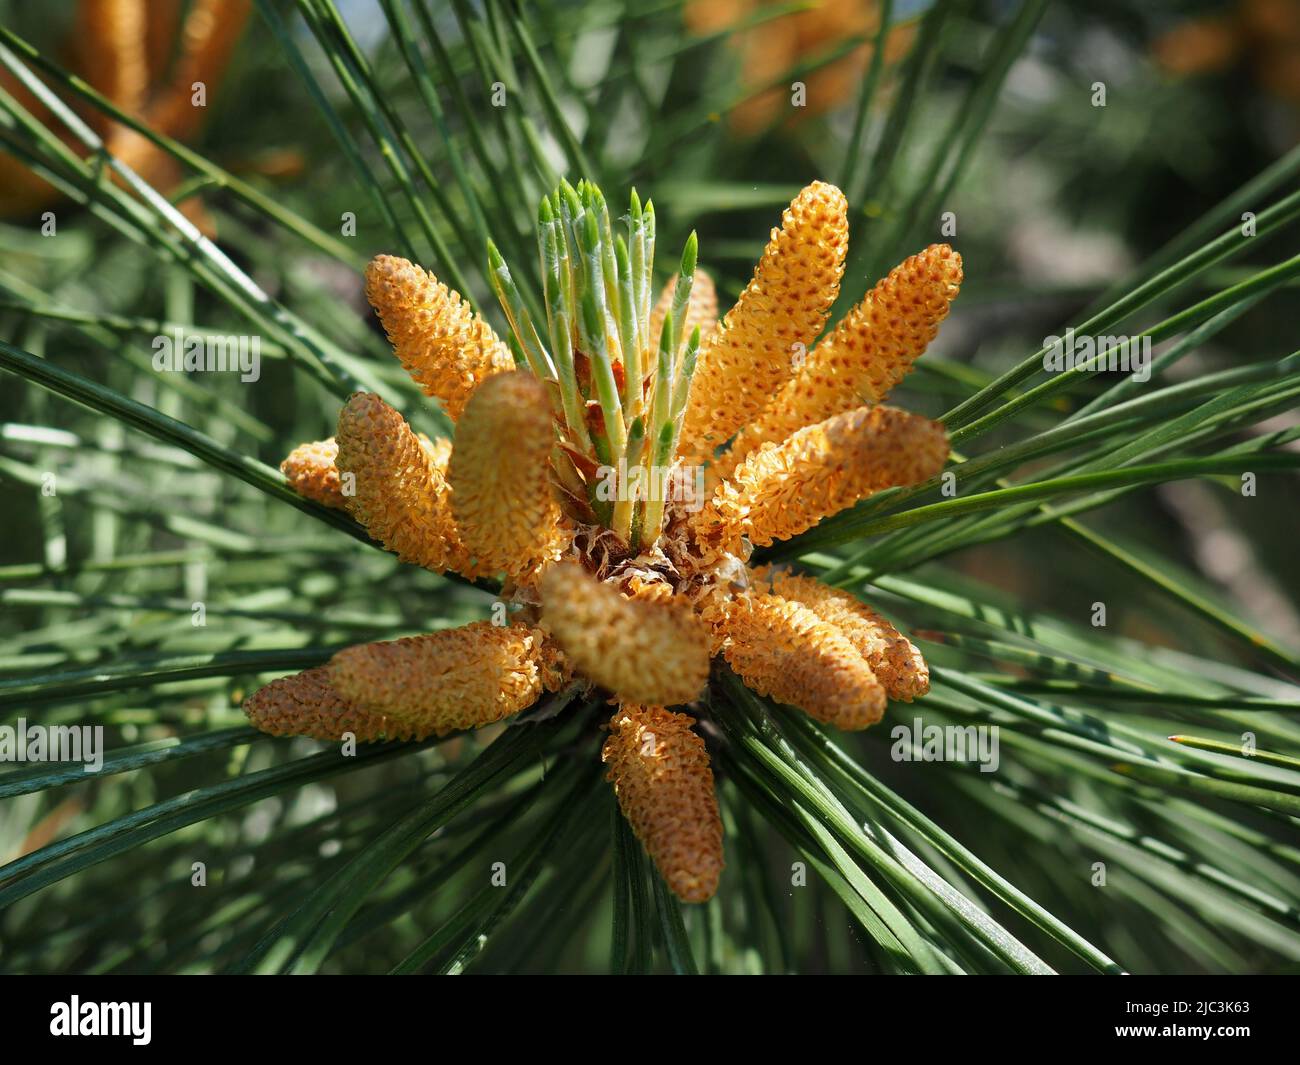 Young cones and needles of a pine tree in early Spring in Ottawa, Ontario, Canada. Stock Photo